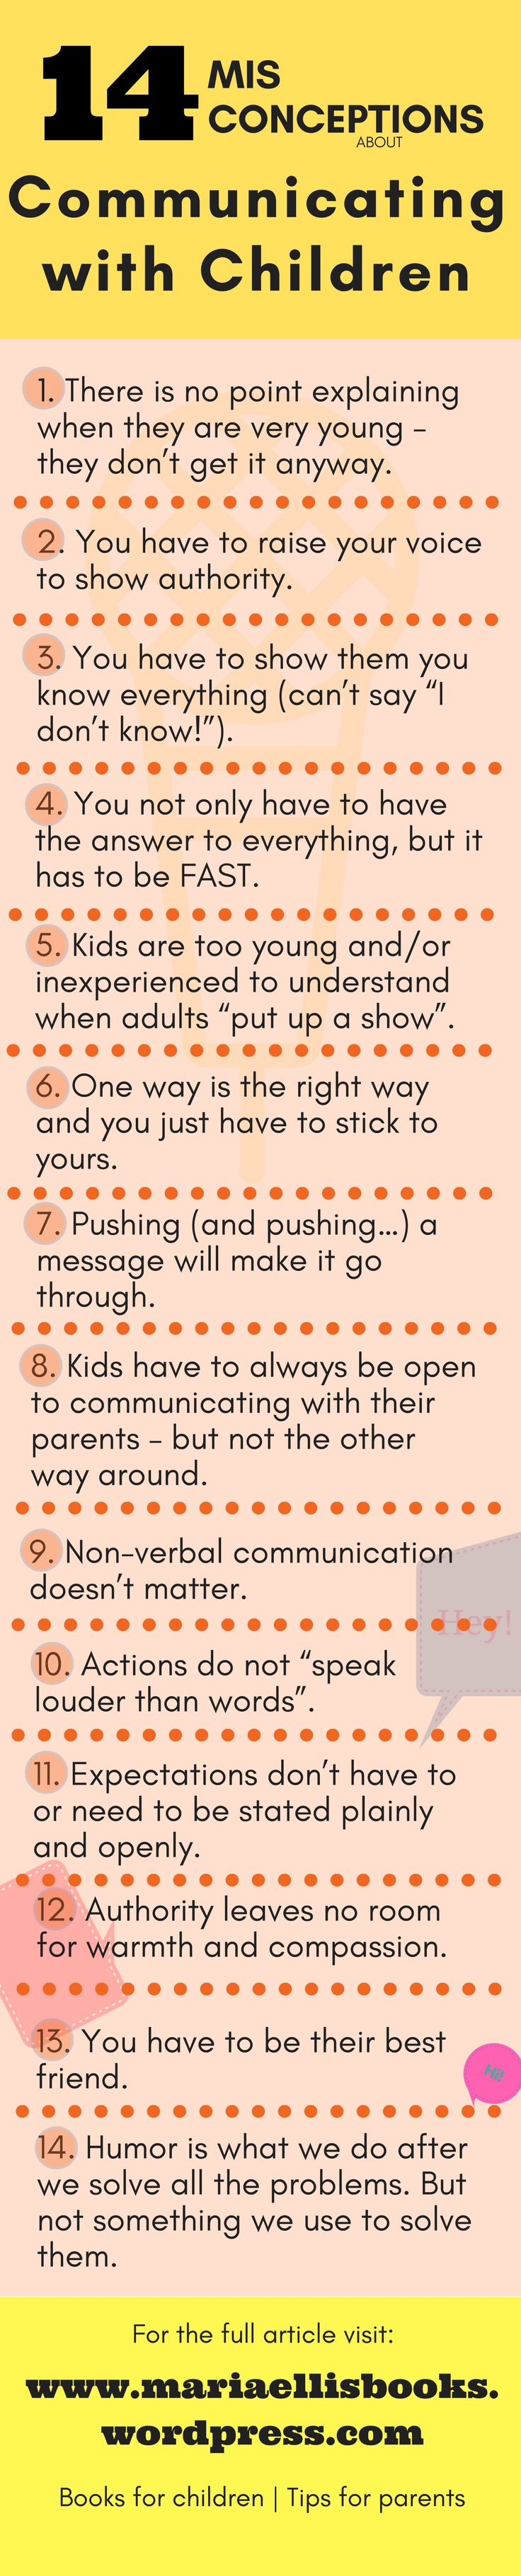 common misconceptions about communicating with children